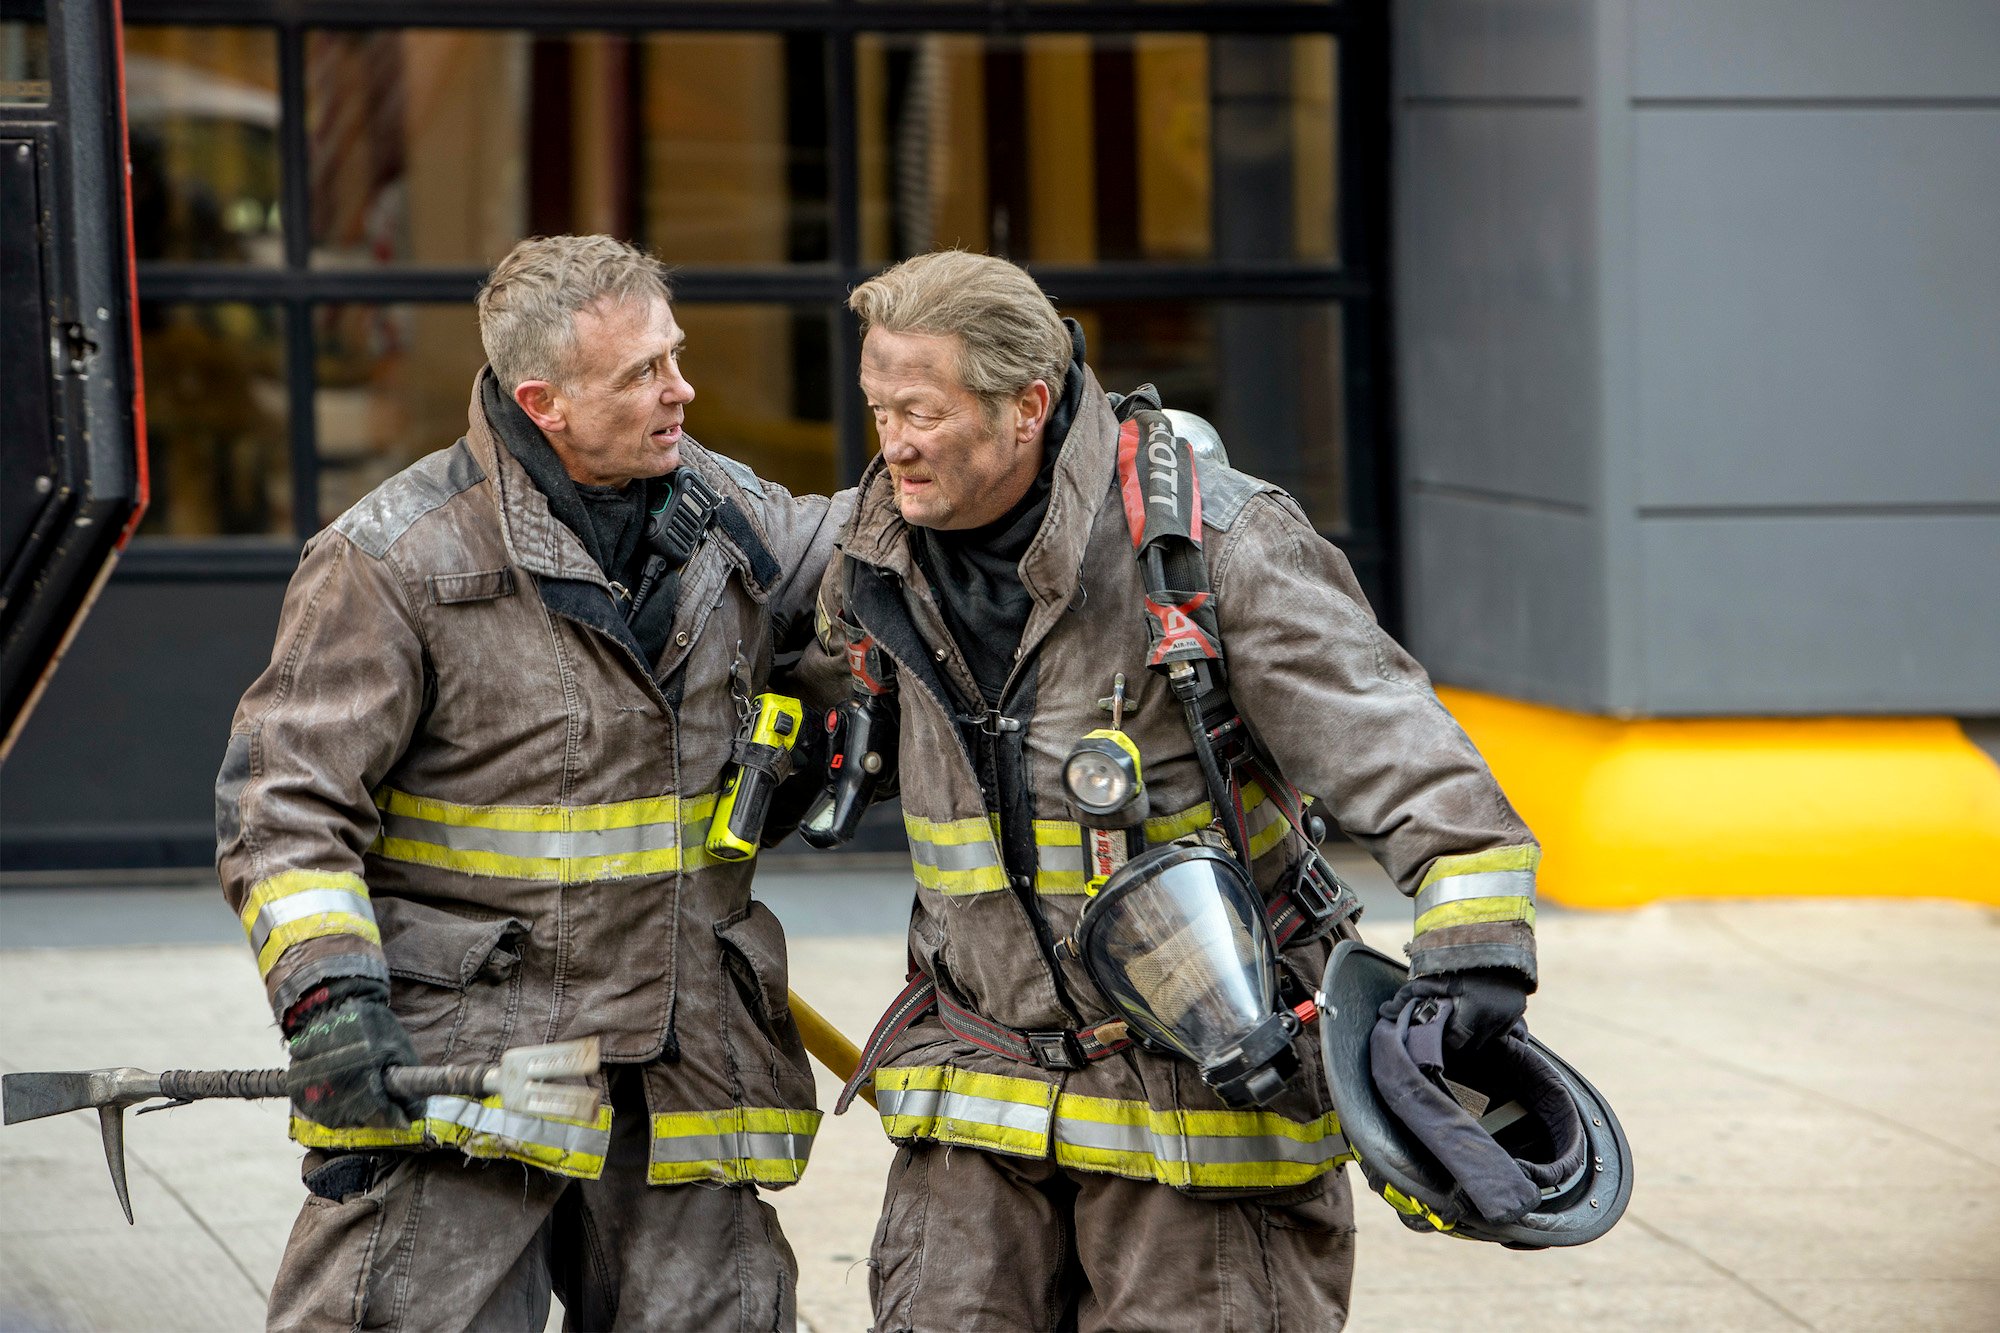 (L-R) David Eigenberg as Christopher Herrmann, Christian Stolte as Randall “Mouch” McHolland in full firefighter gear, covered in soot, standing on a sidewalk talking